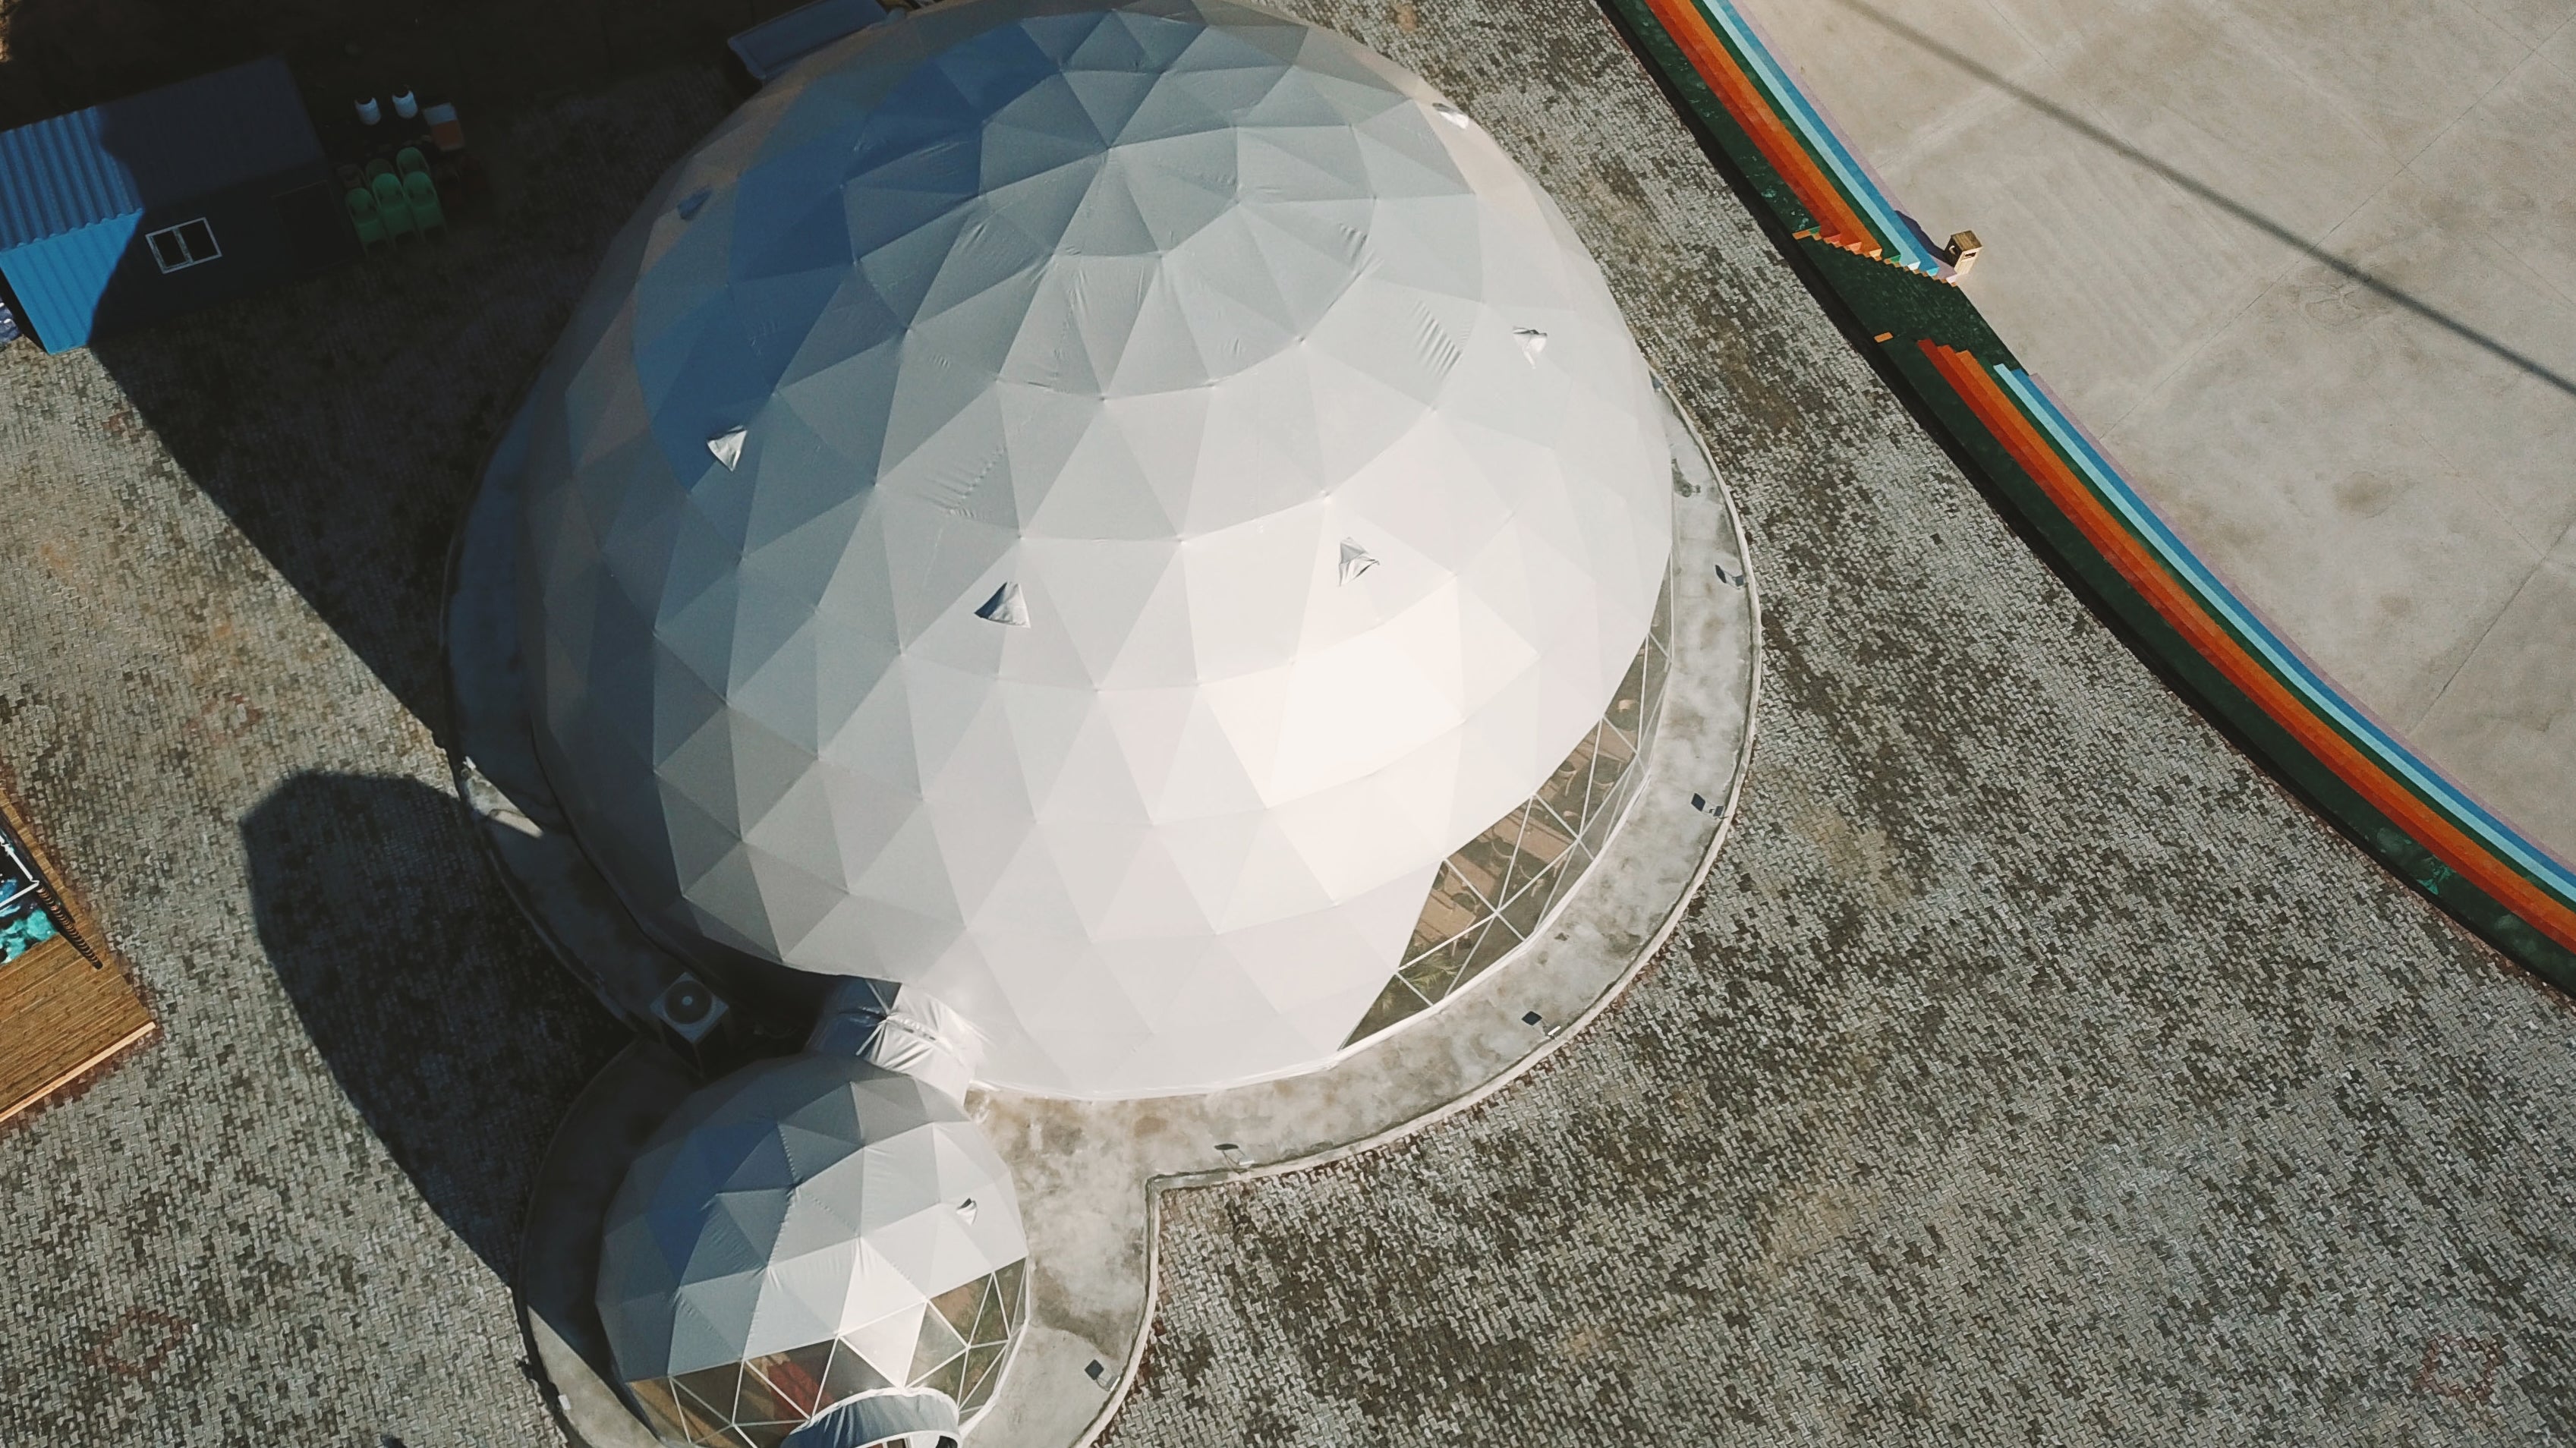 Commercial giant geodesic dome for event / expo / wedding / bar